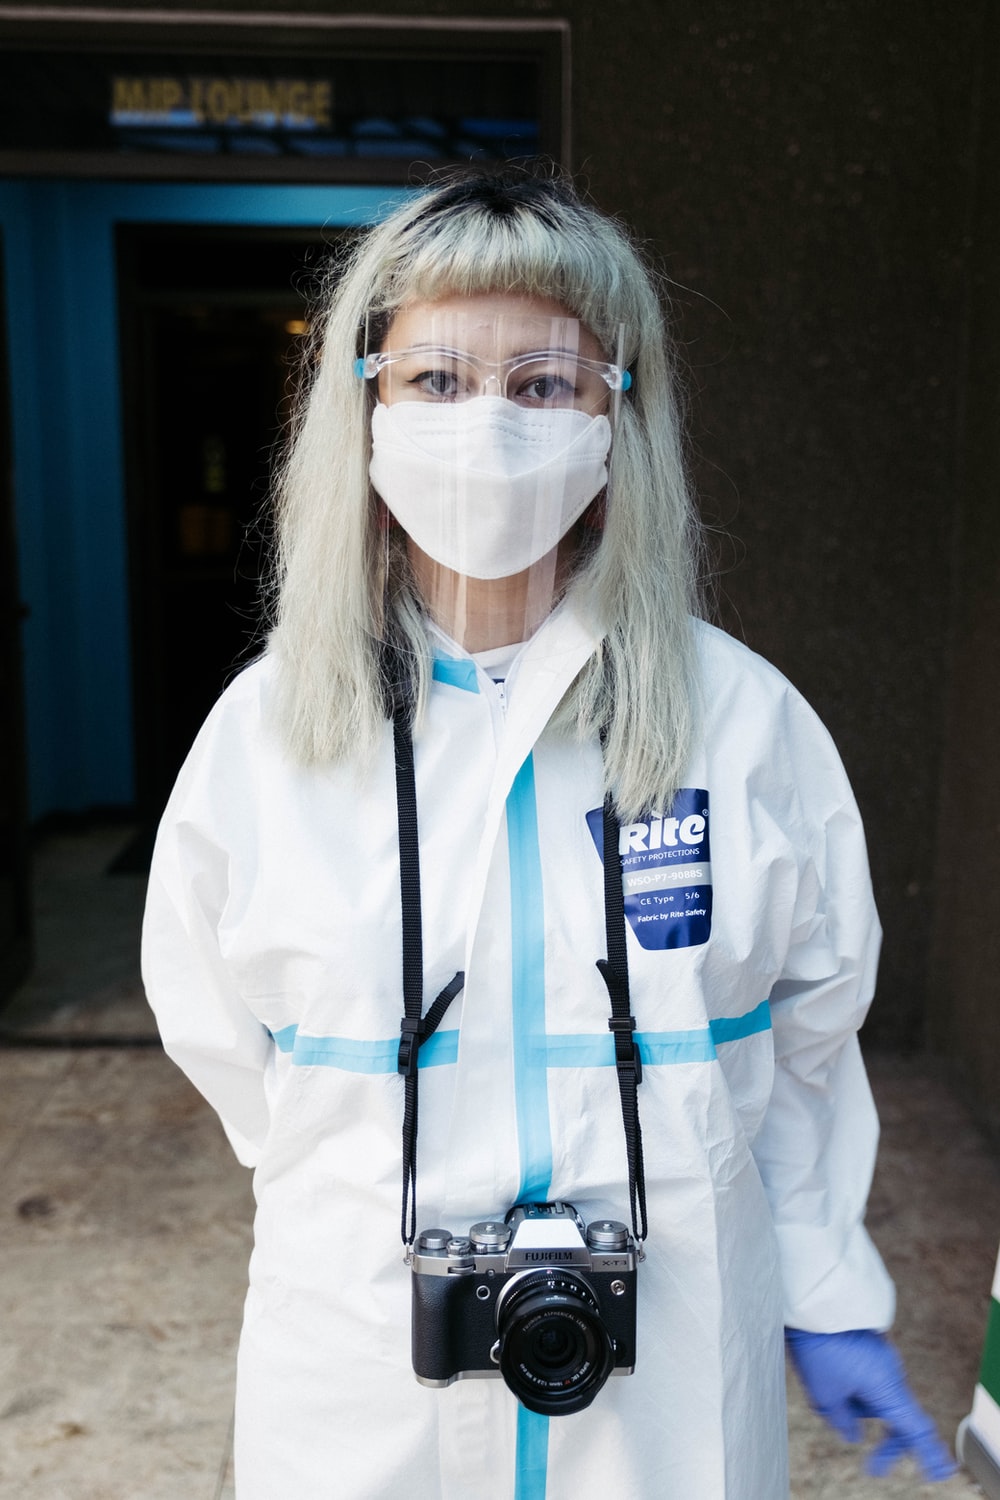 Ppe Kit Picture. Download Free Image